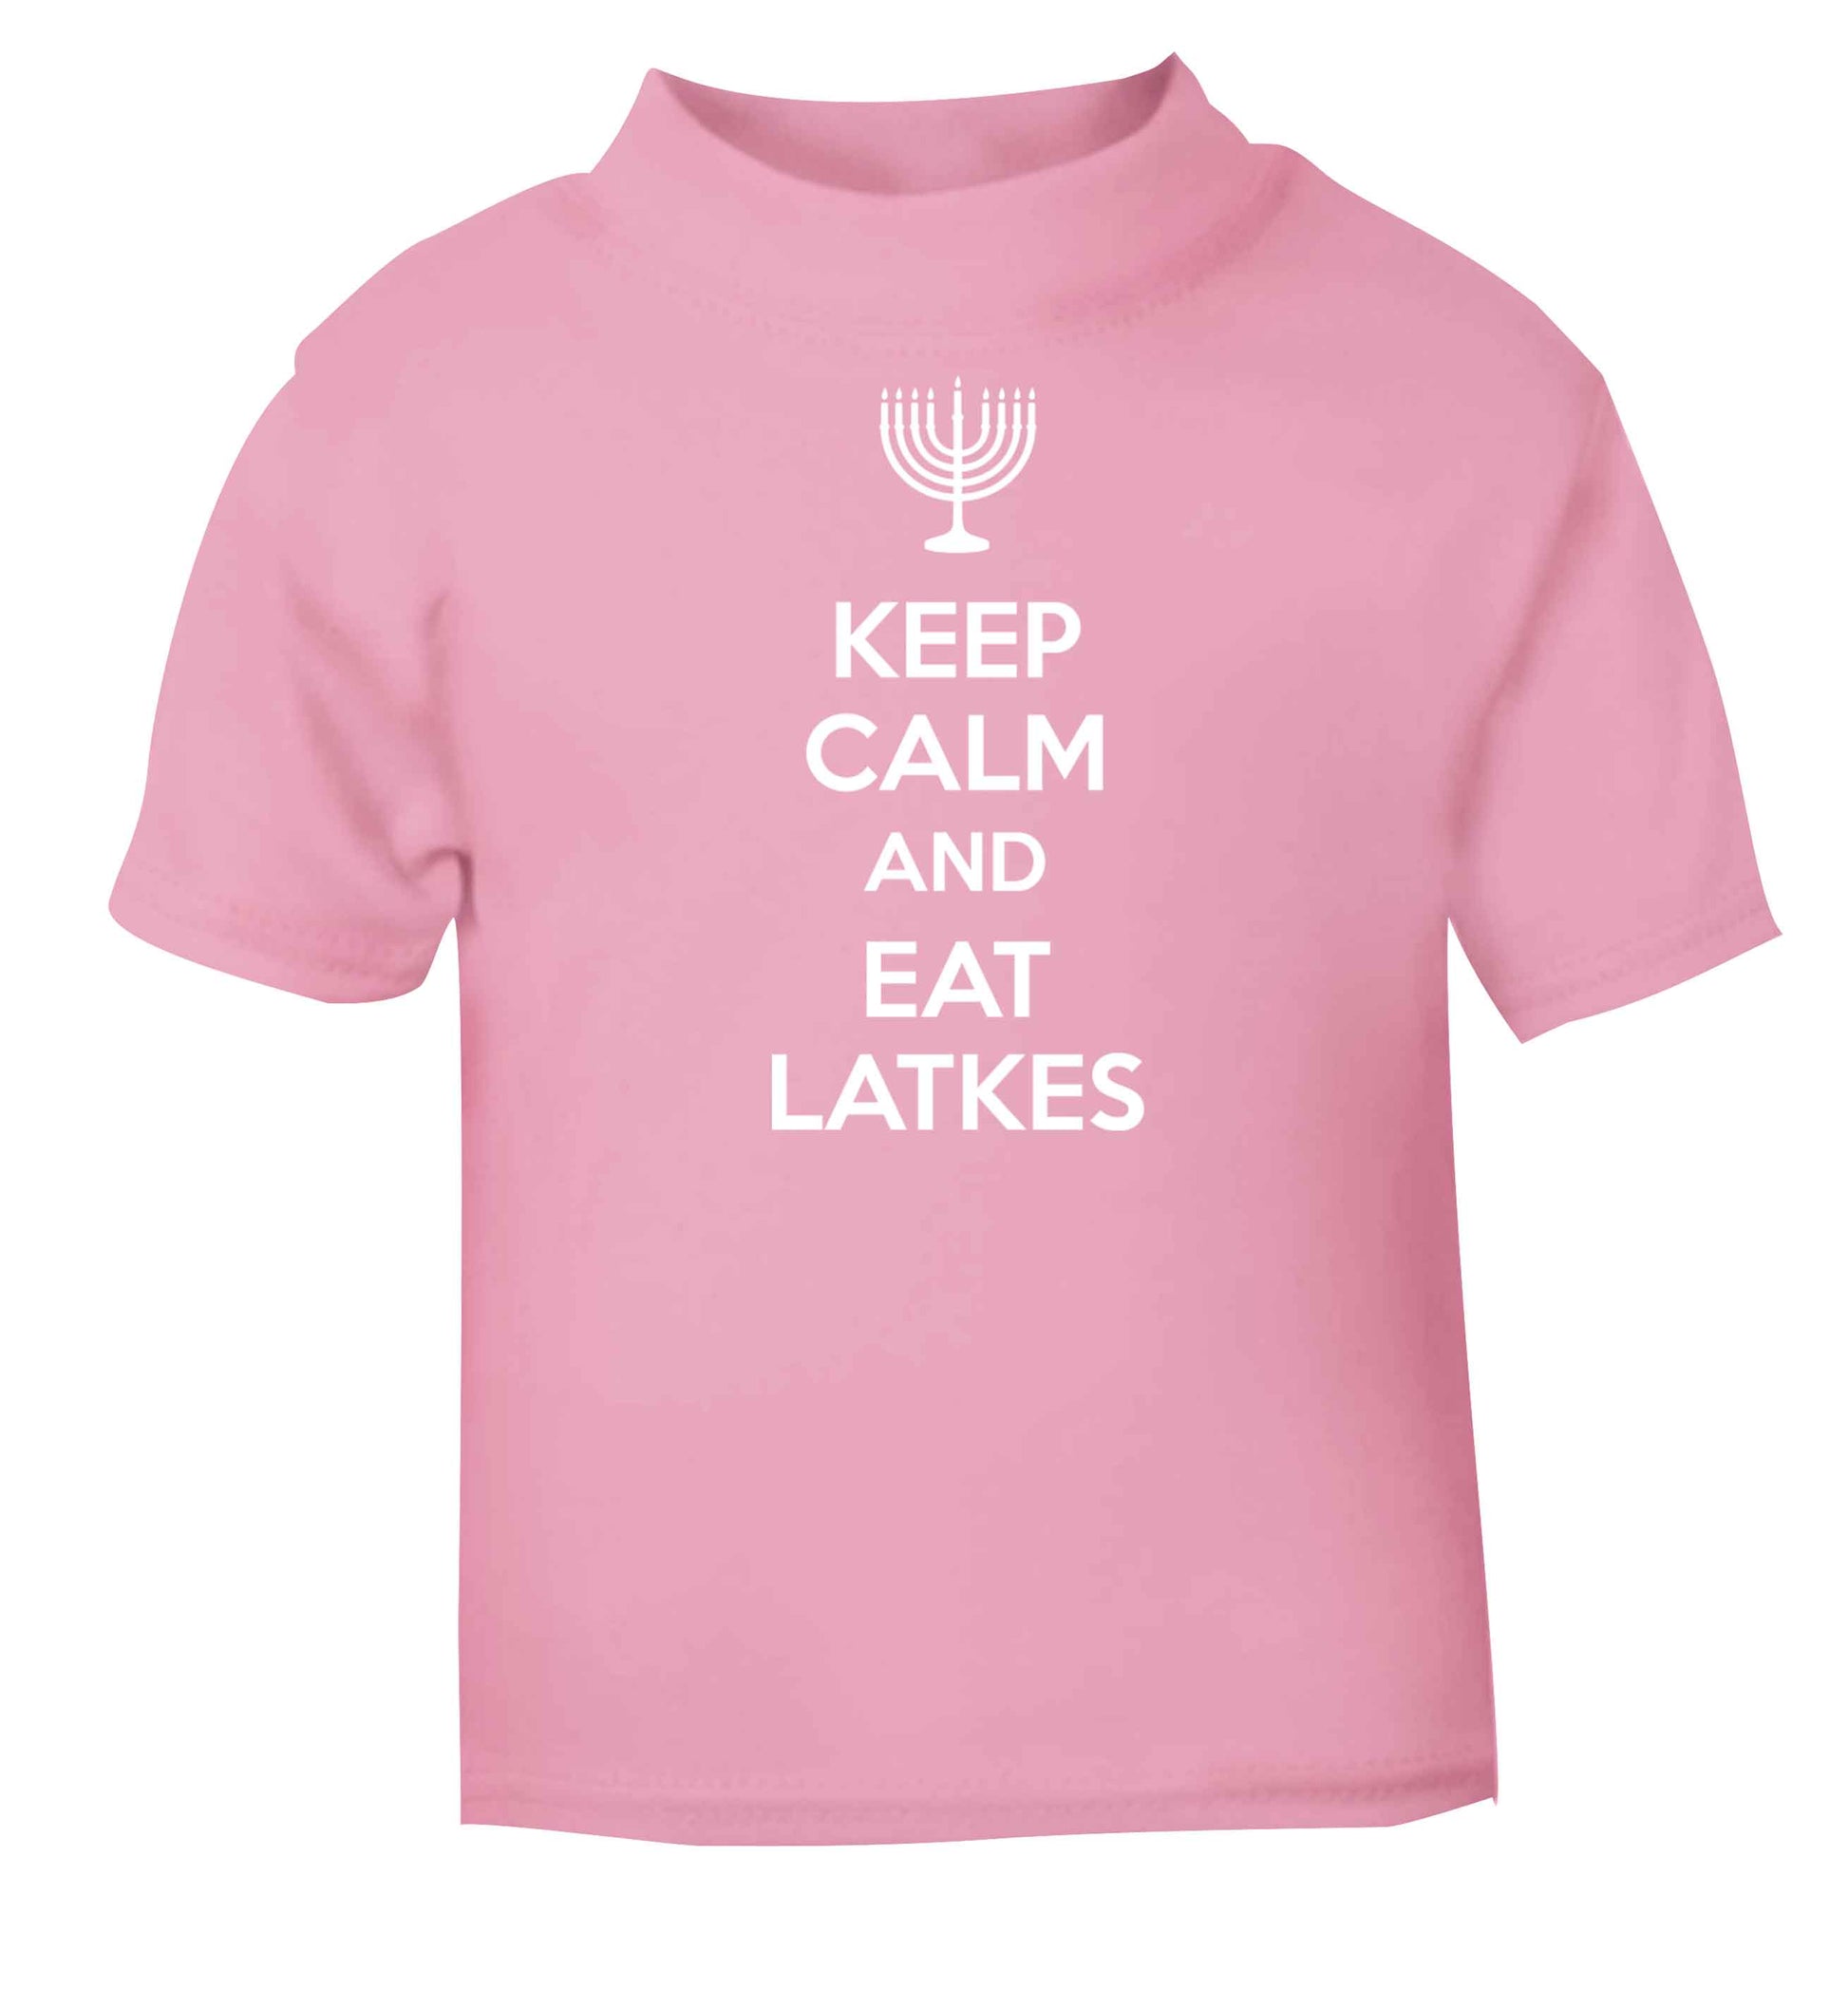 Keep calm and eat latkes light pink baby toddler Tshirt 2 Years